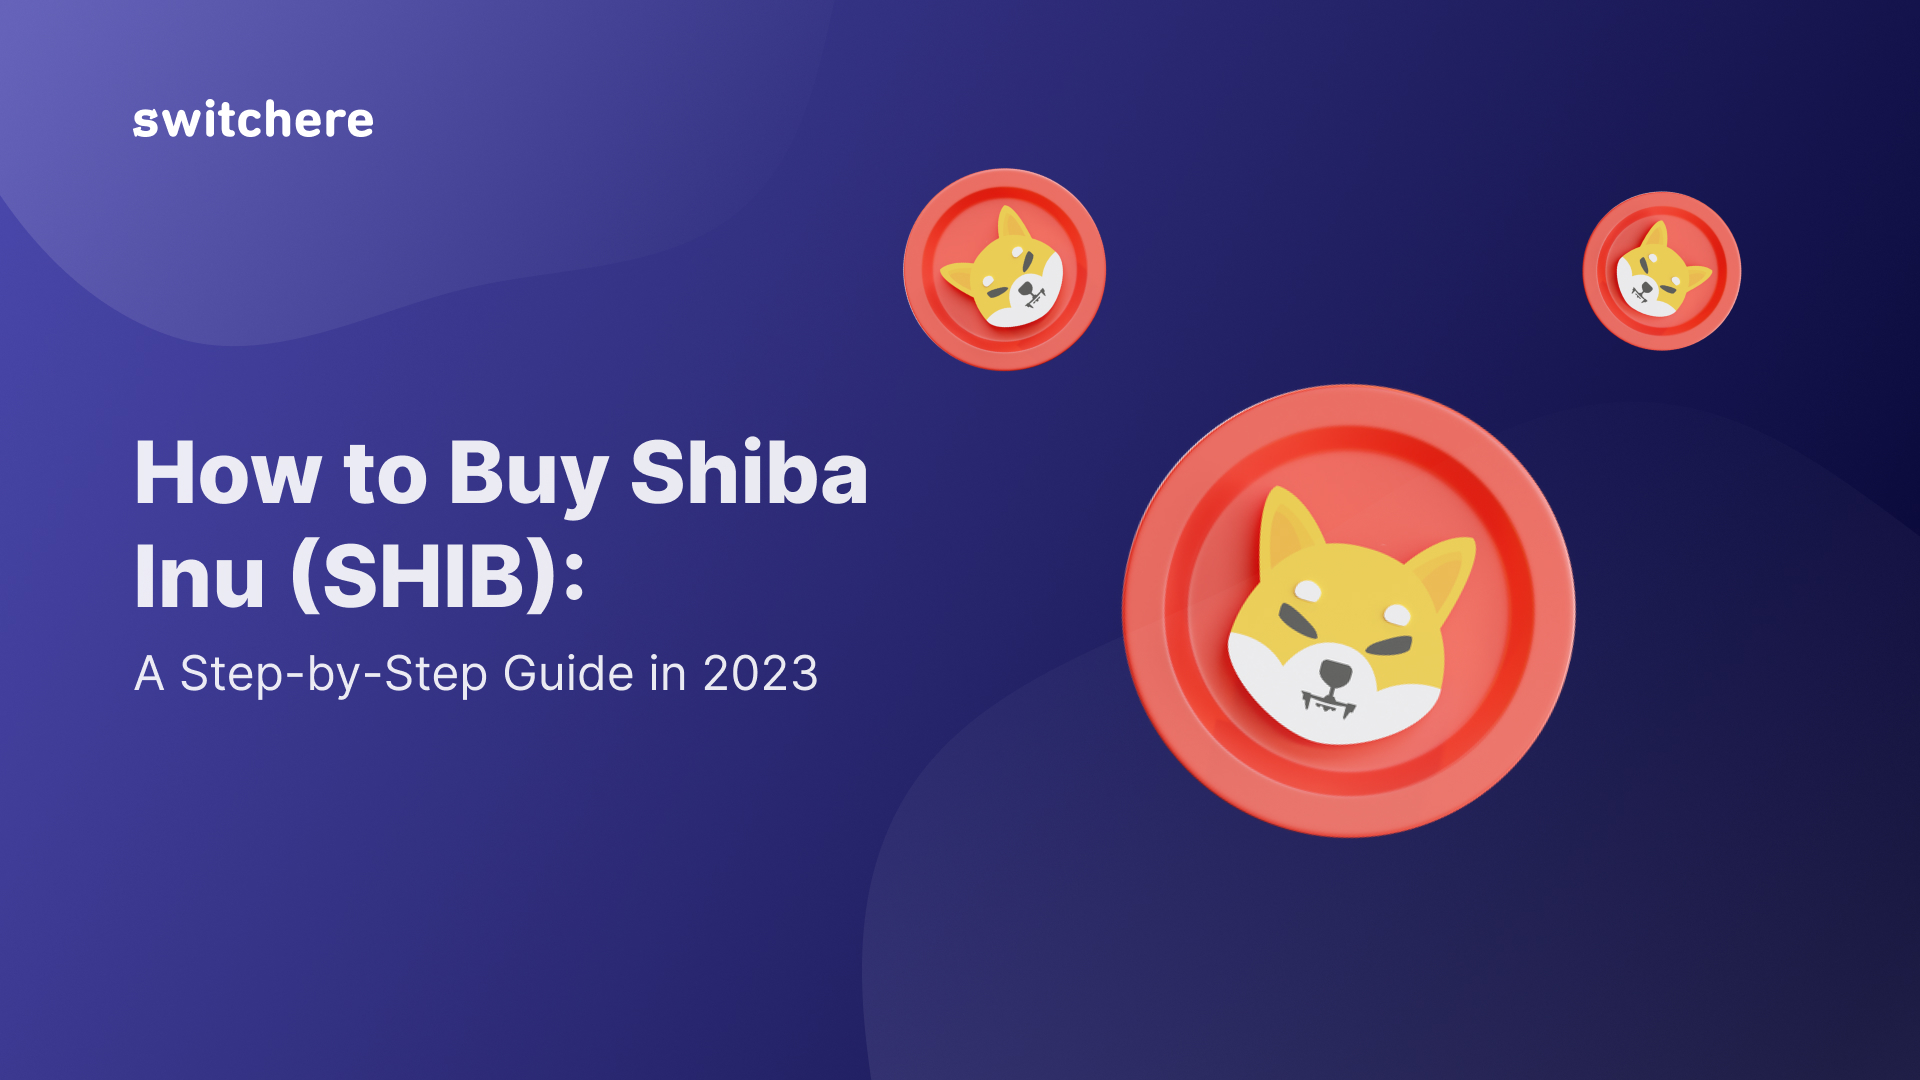 How to Buy Shiba Inu (SHIB): A Step-by-Step Guide in 2023